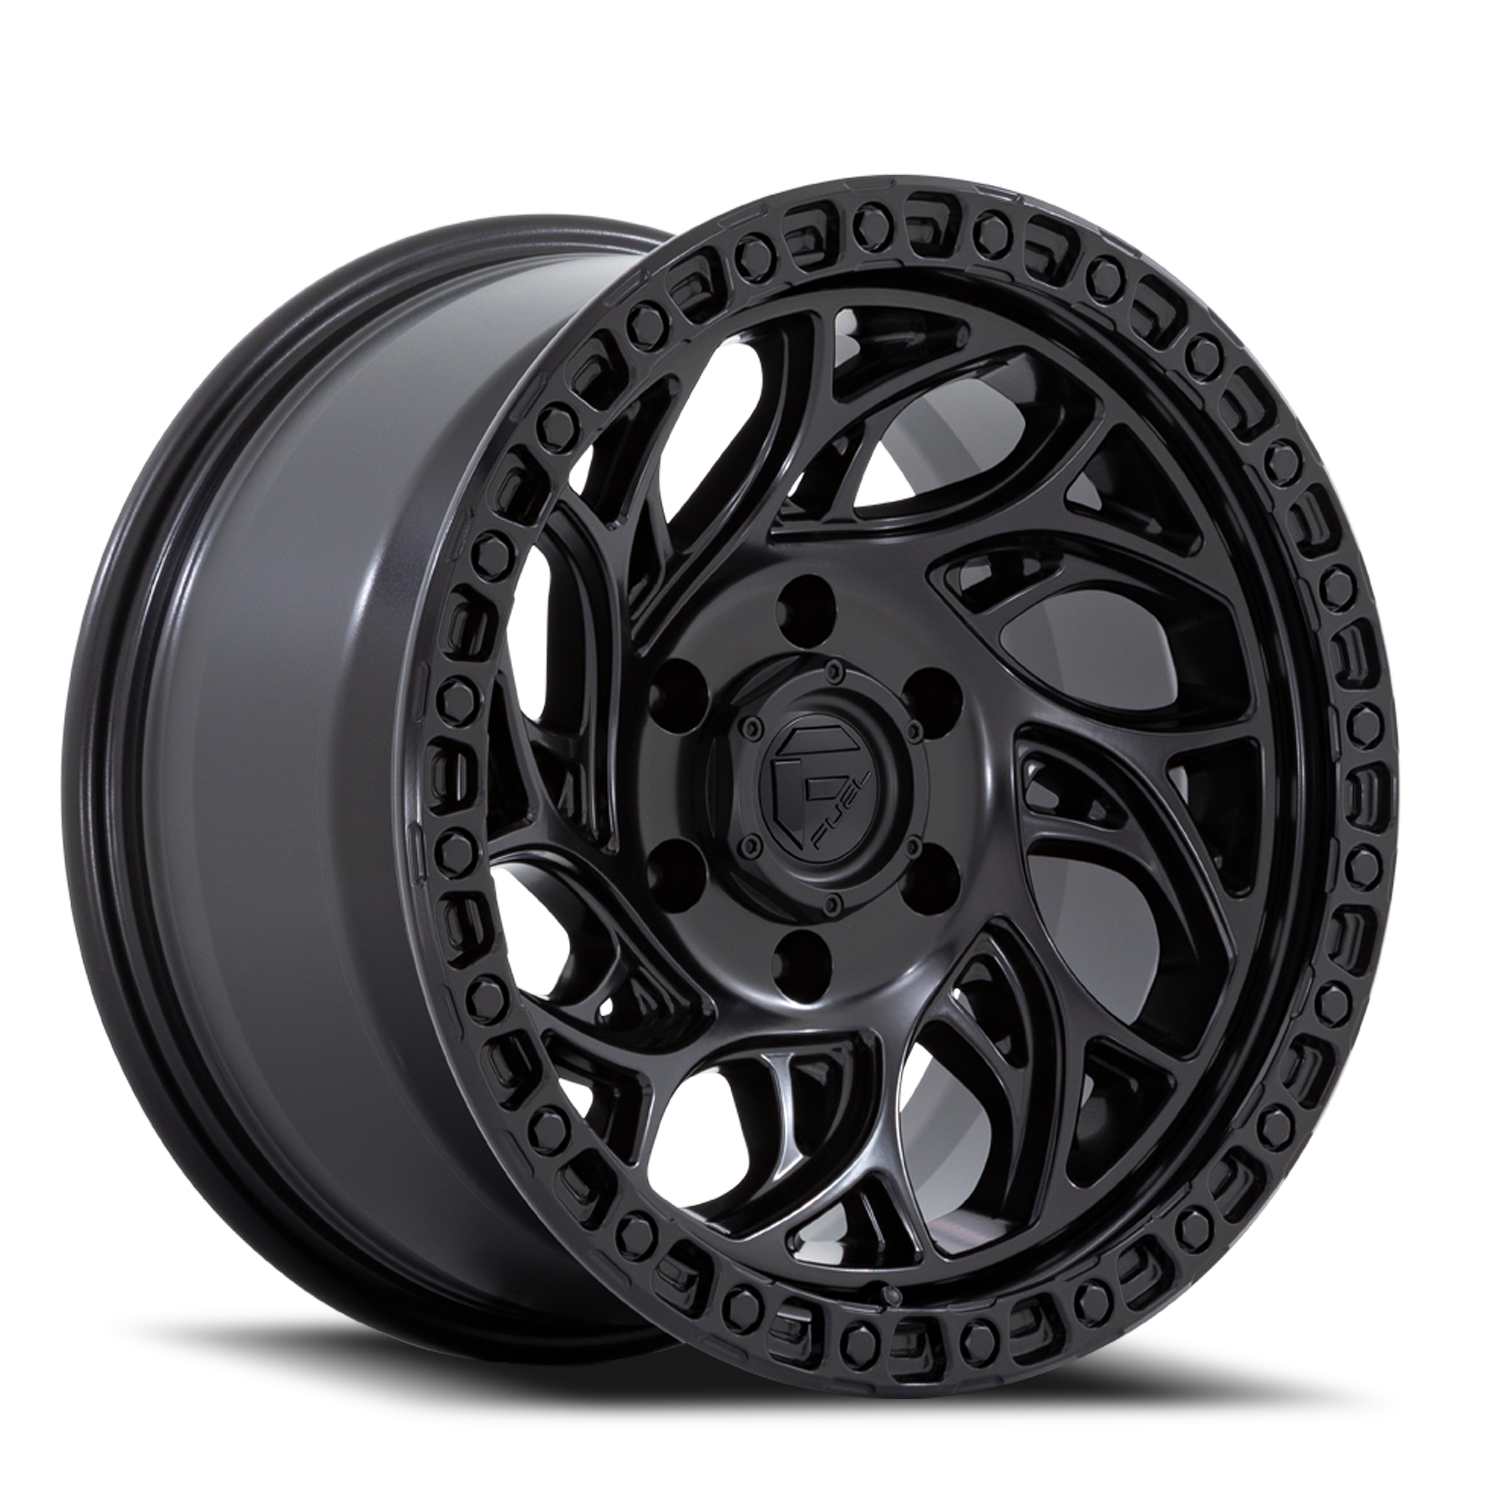 Aluminum Wheels 17X9 Runner OR D852 6 On 135 Blackout 87.1 Bore 1 Offset Fuel Off Road Wheels